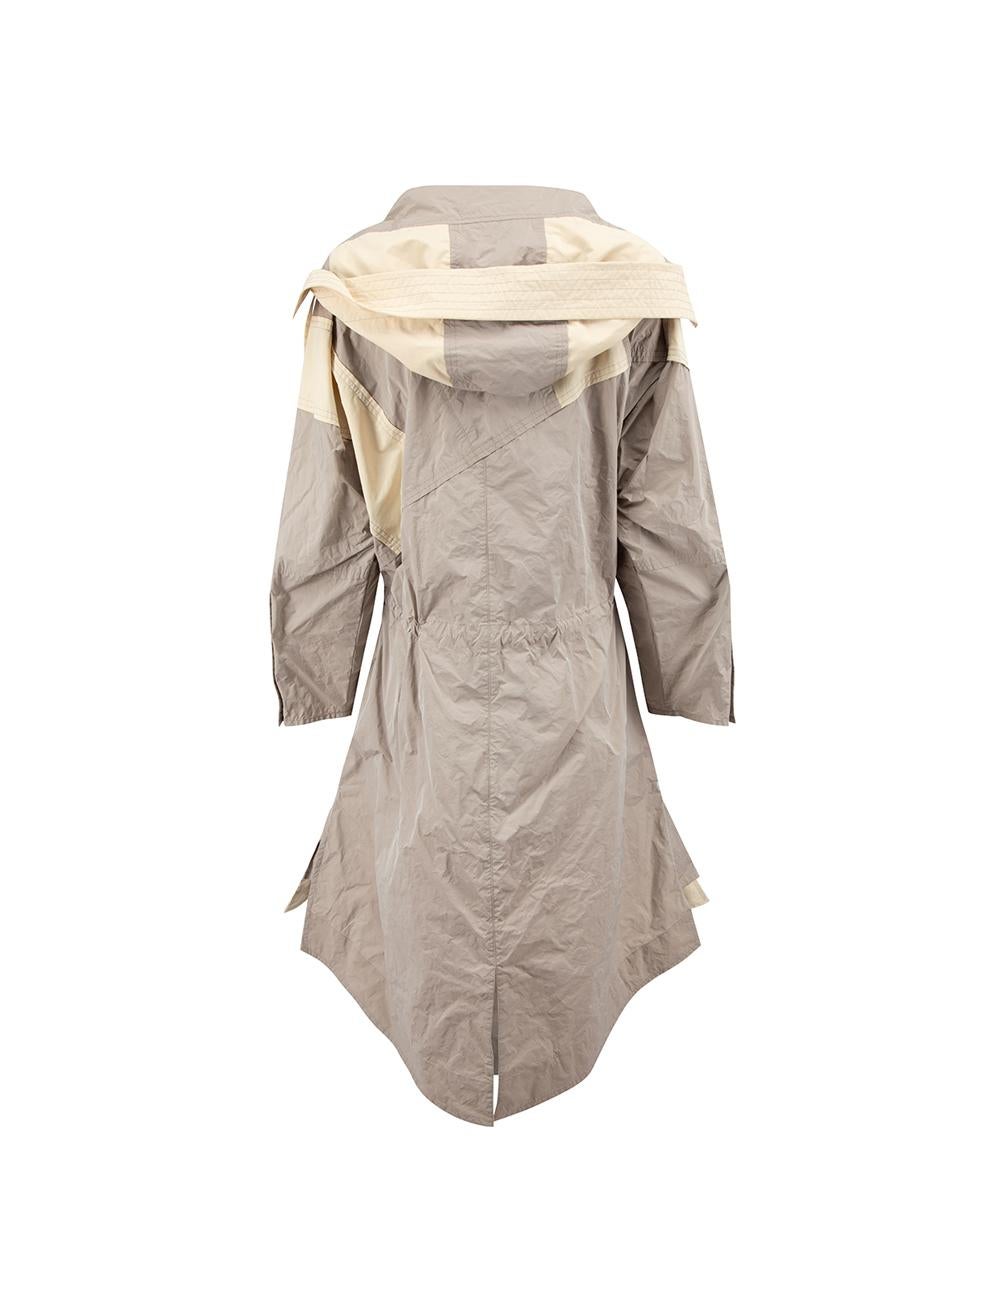 Moncler Moncler Genius Grey 1952 Freesia Long Raincoat Size XS In New Condition For Sale In London, GB